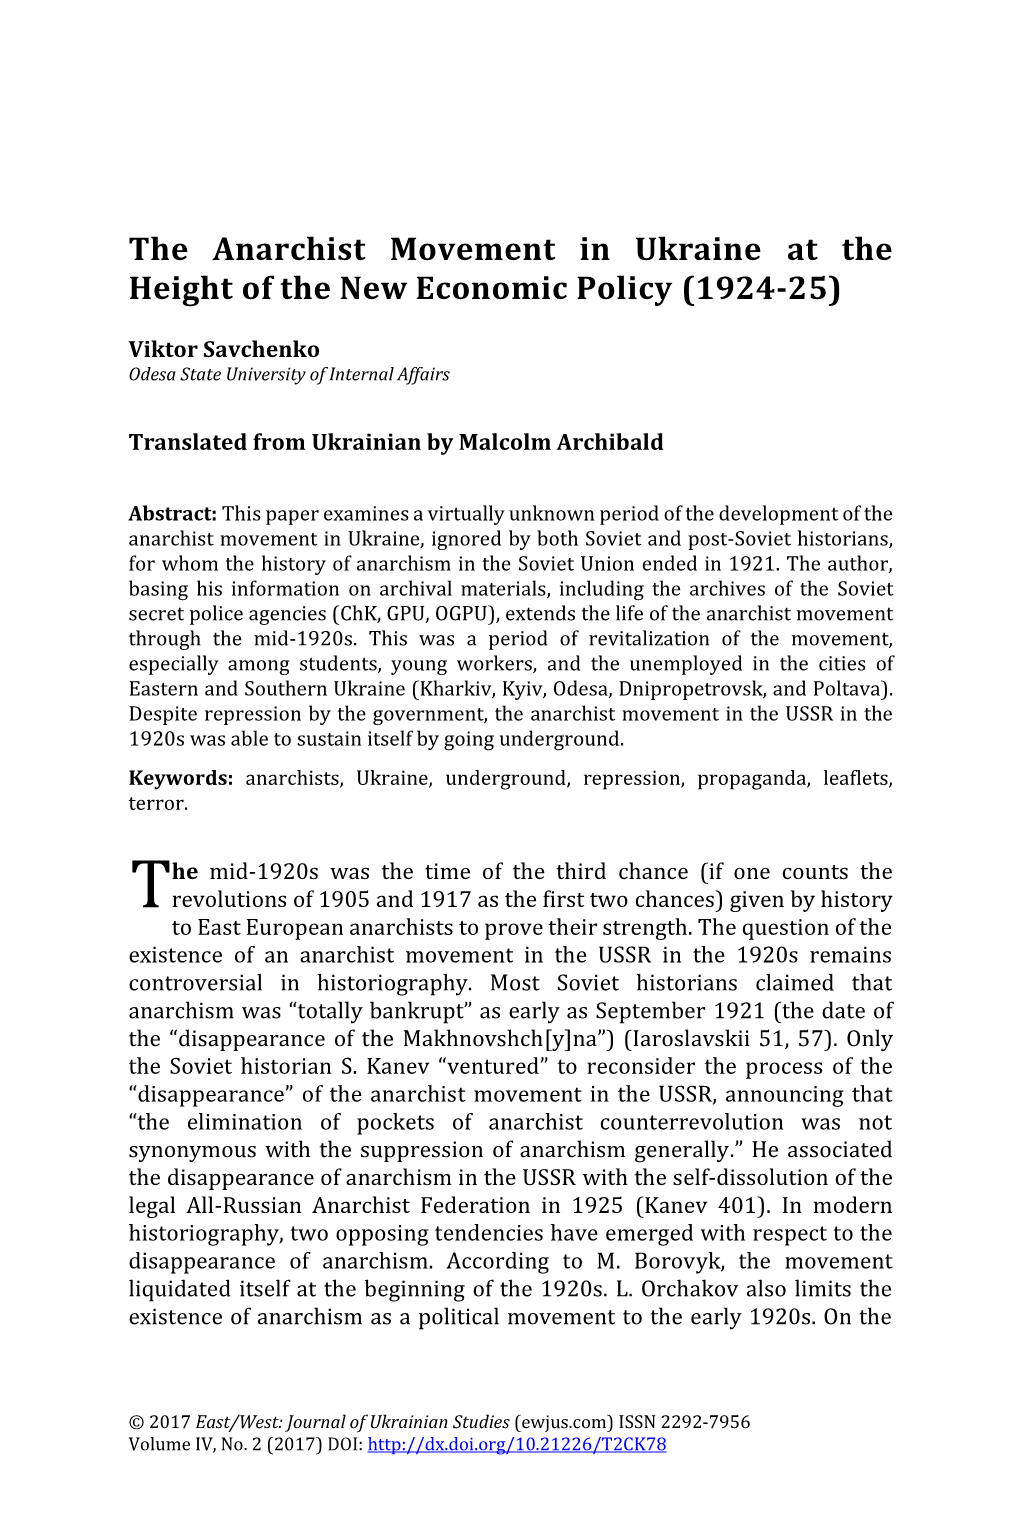 The Anarchist Movement in Ukraine at the Height of the New Economic Policy (1924-25)